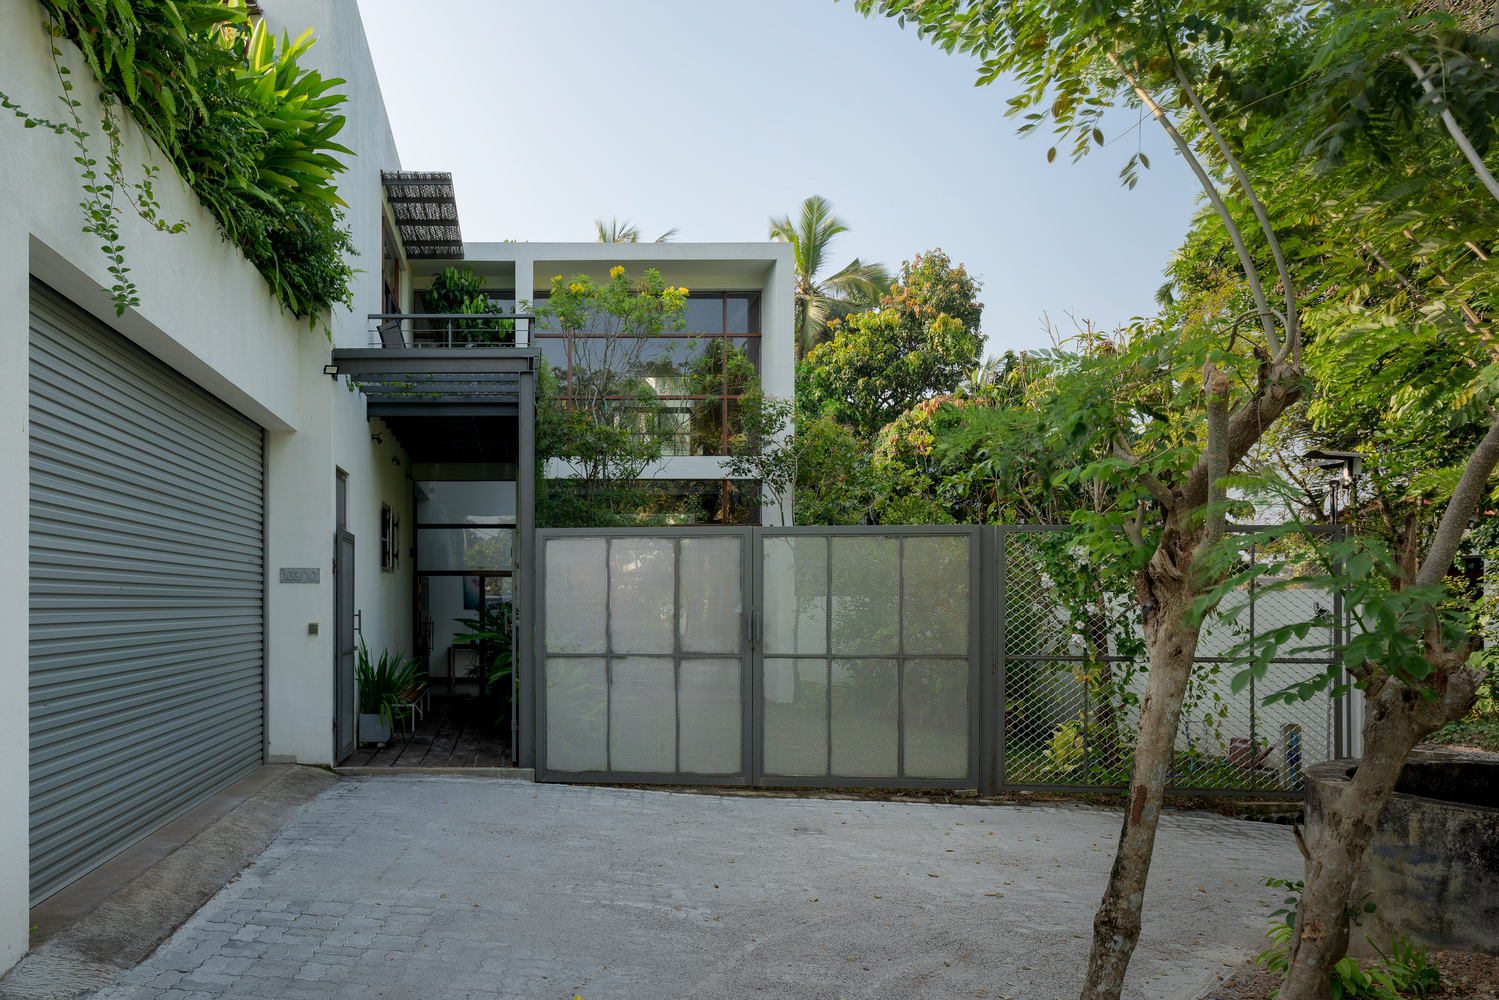 Square Concrete House. Live In Harmony With The Green Of Nature - NewsFeed